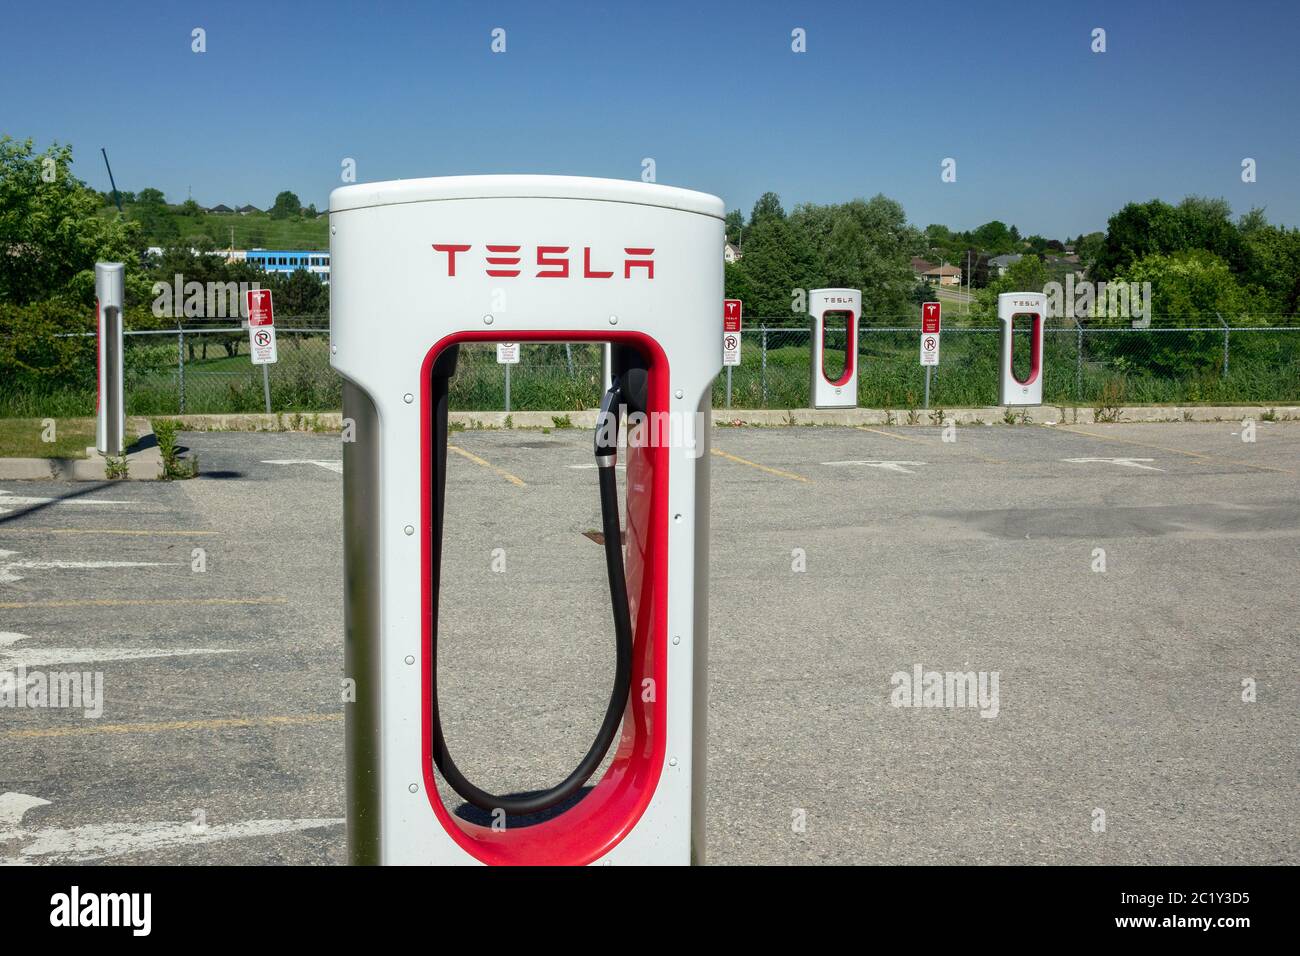 Tesla Electric Car Charging Station Supercharging Network In Woodstock Ontario Canada Parking Sign Stock Photo